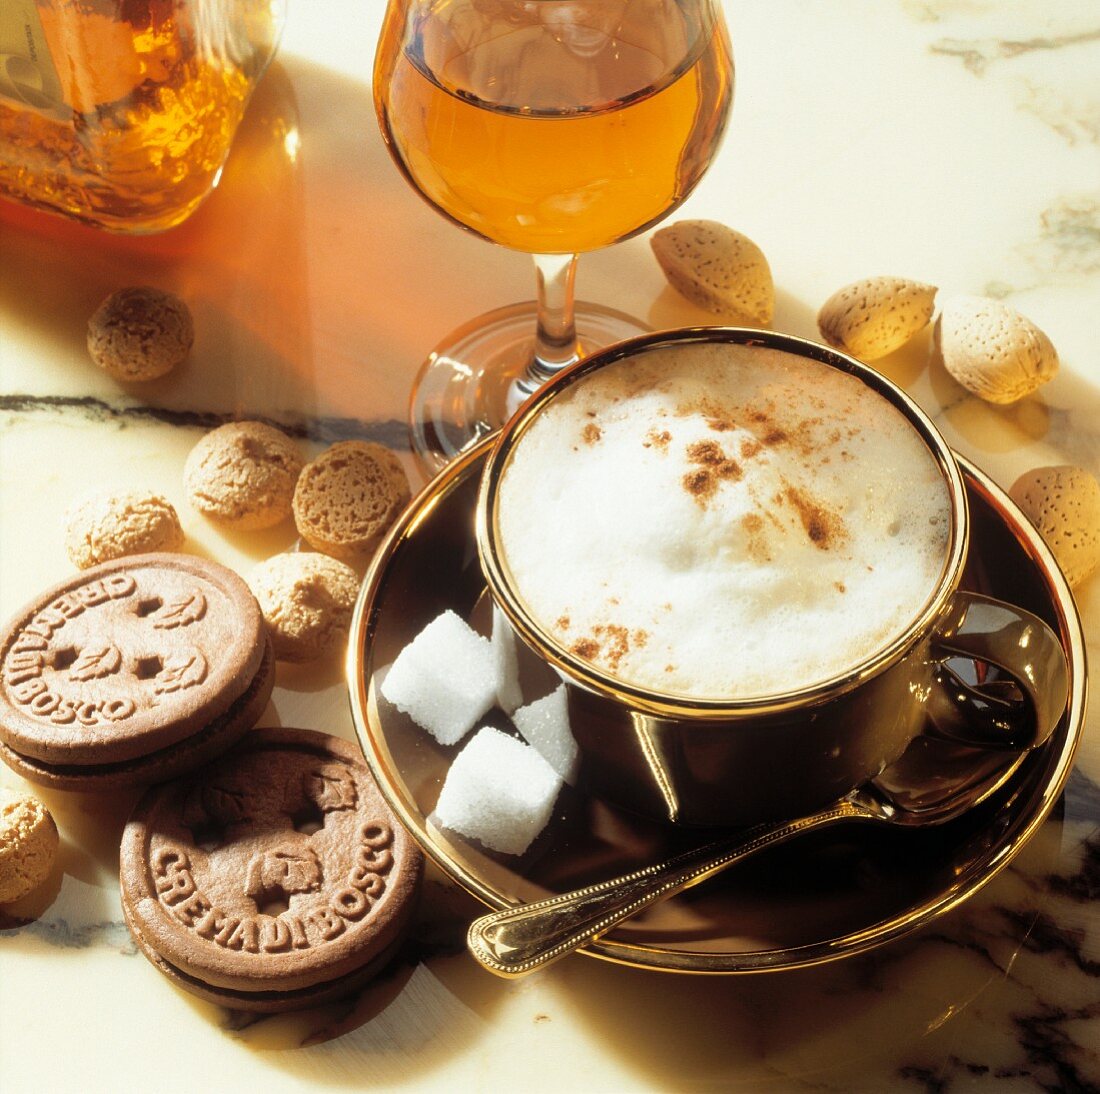 Capuccino with Sugar Cubes and Cookies